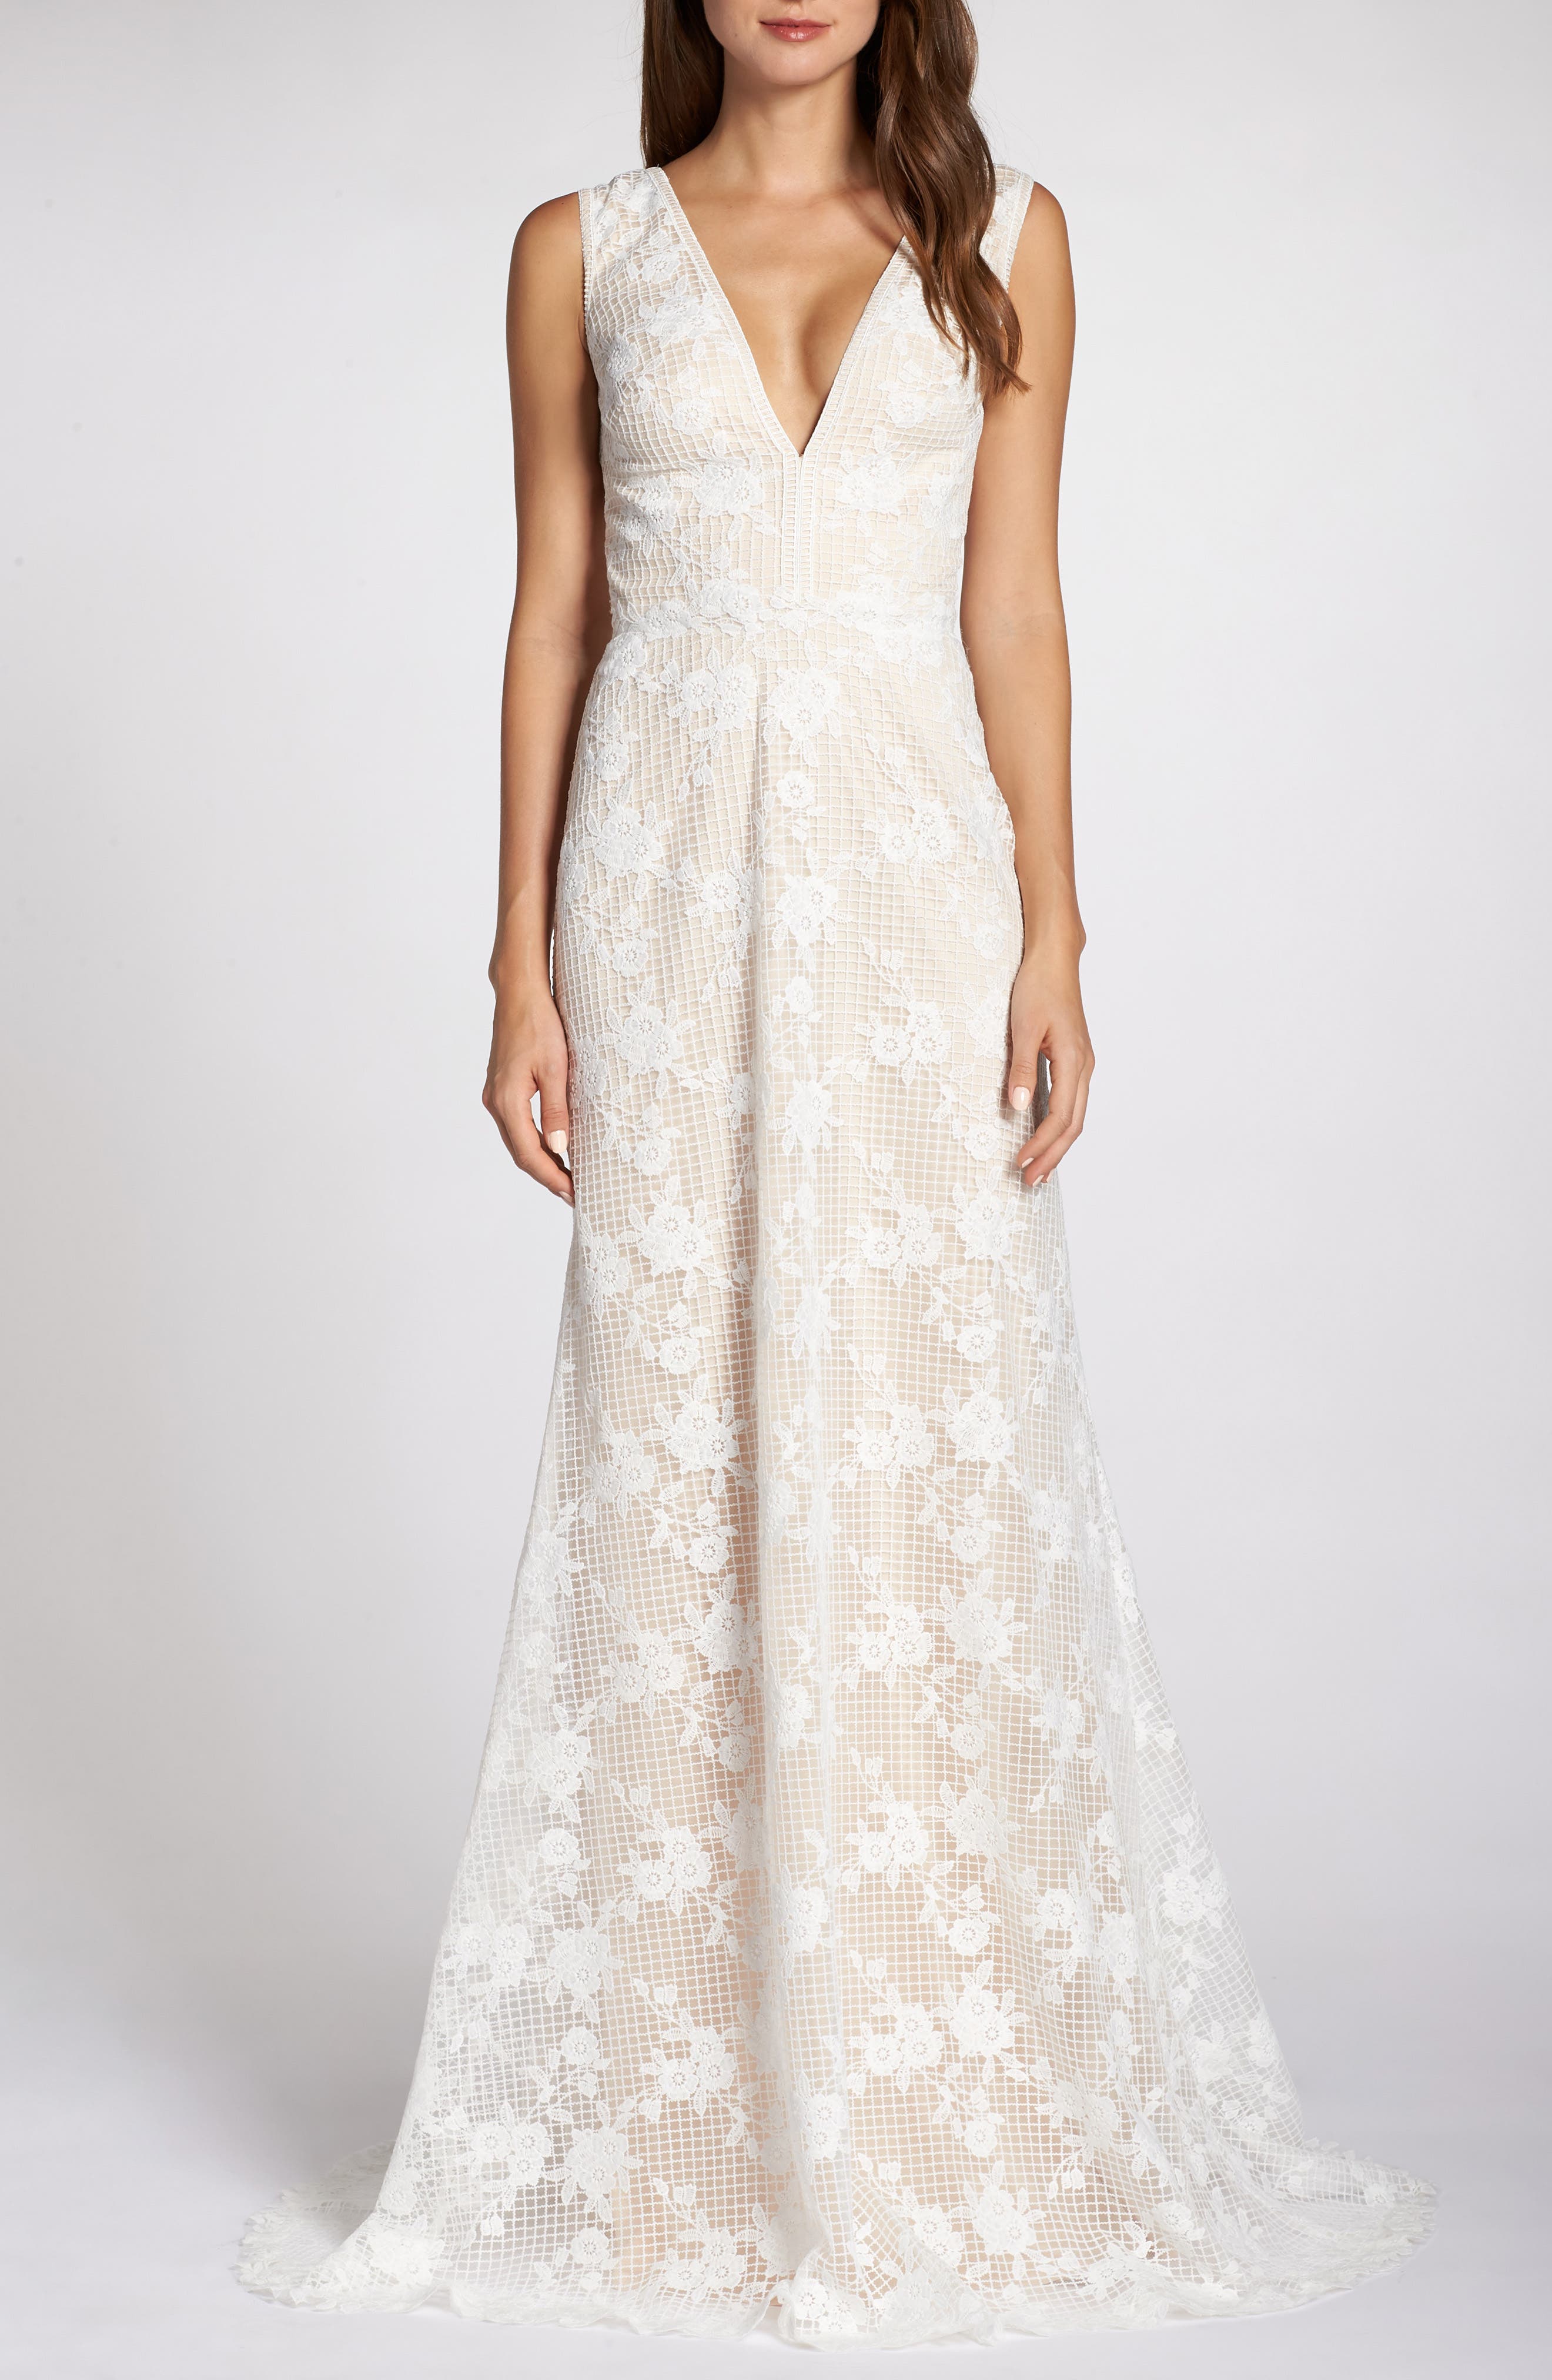 nordstrom gowns for weddings